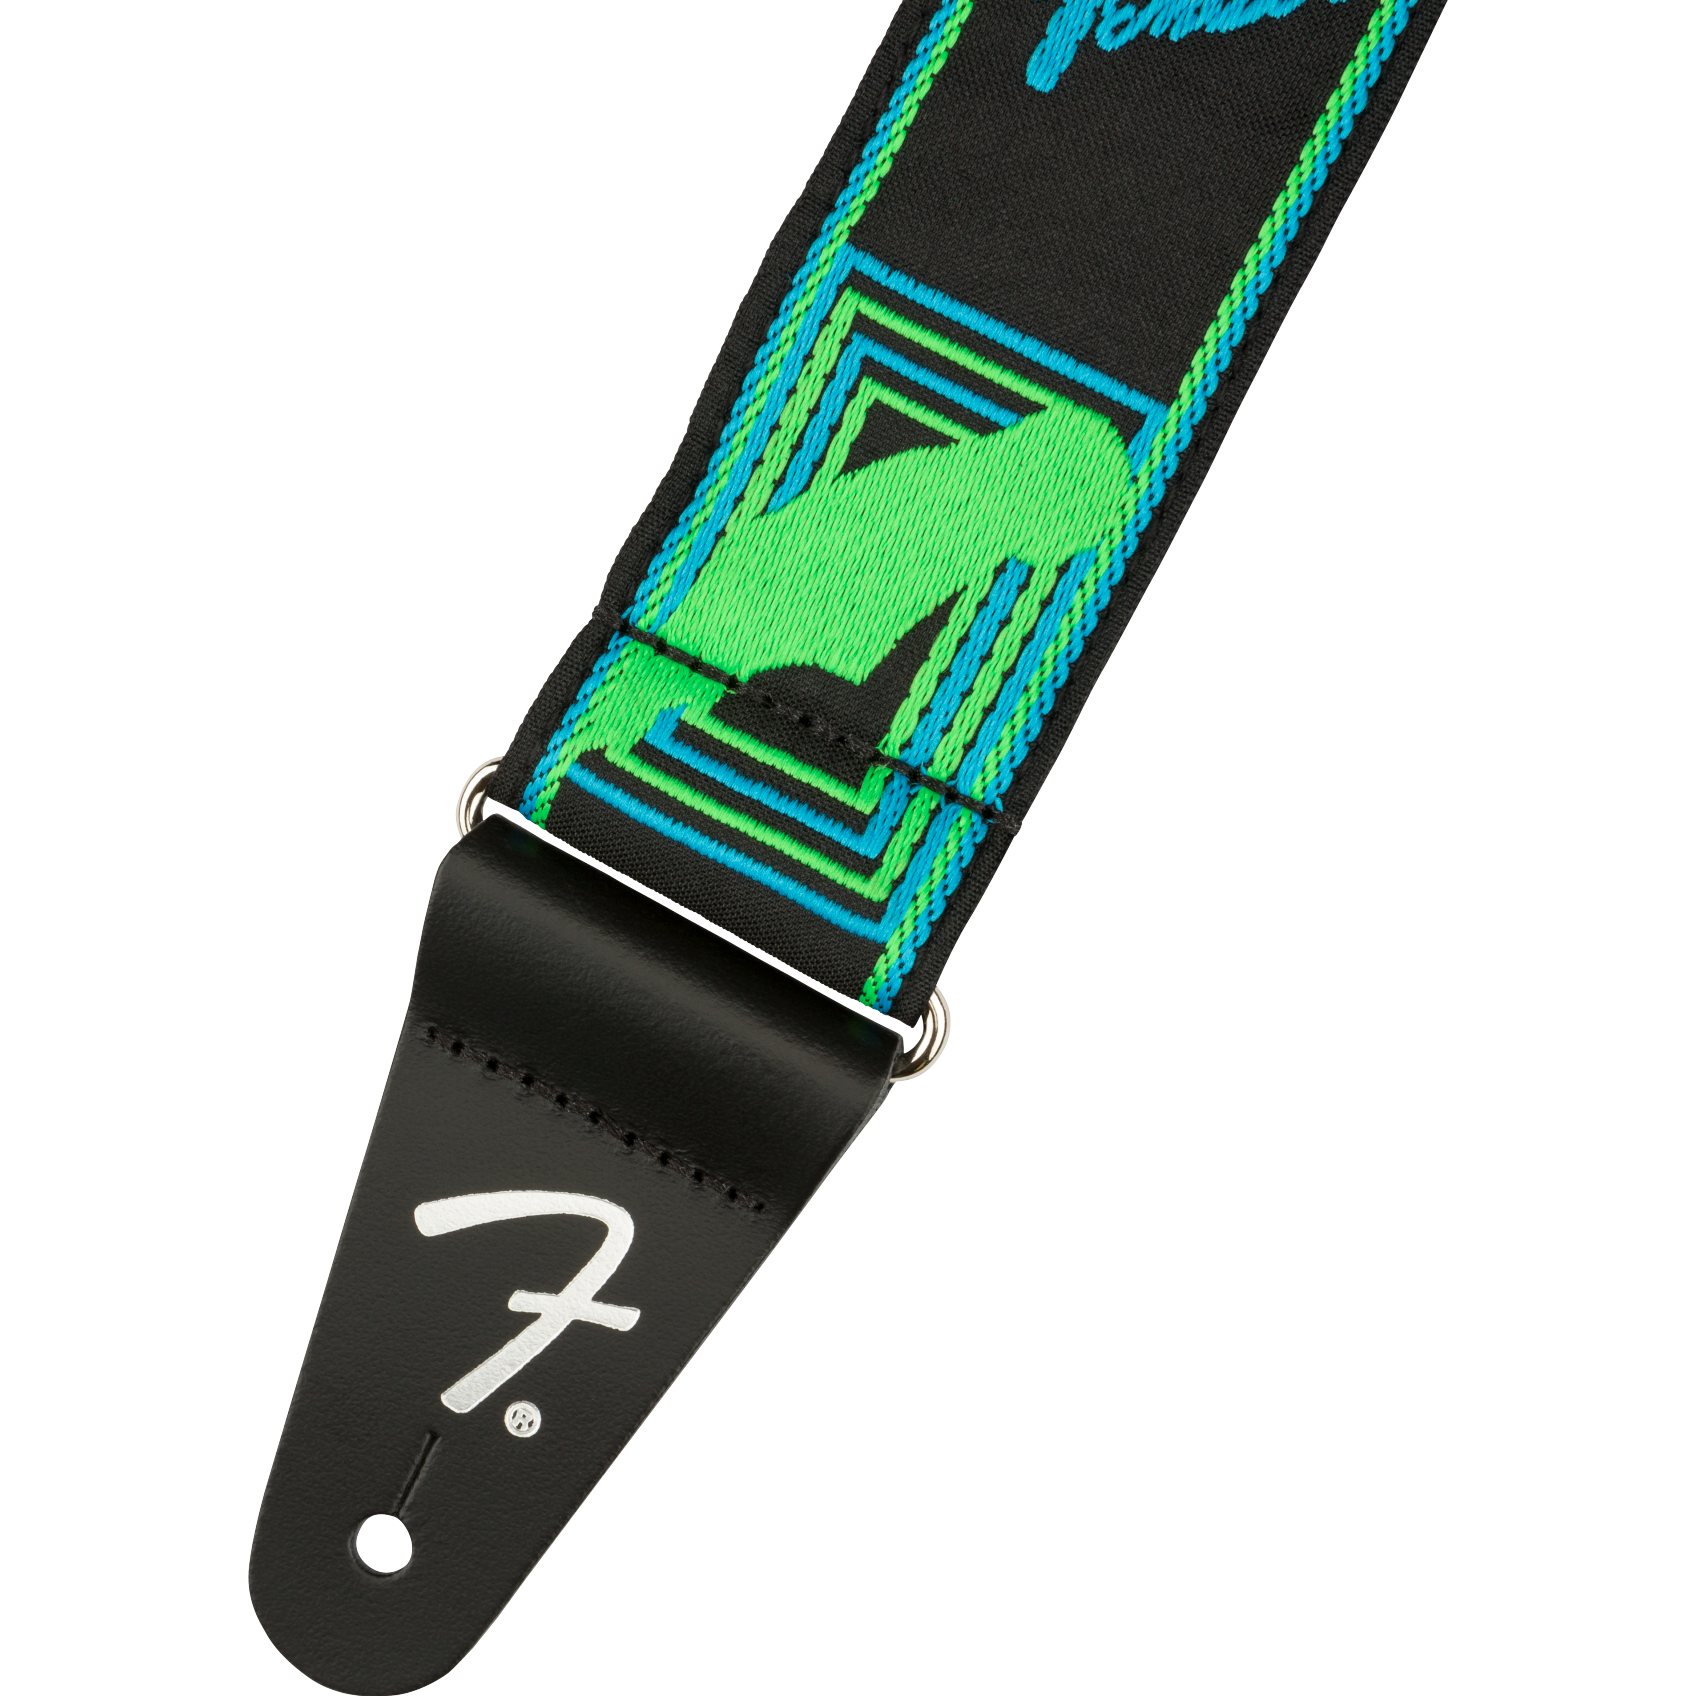 Image 2 of Fender Neon Monogrammed Strap, Green/Blue - SKU# FNEON-GRN/BLUE : Product Type Accessories & Parts : Elderly Instruments